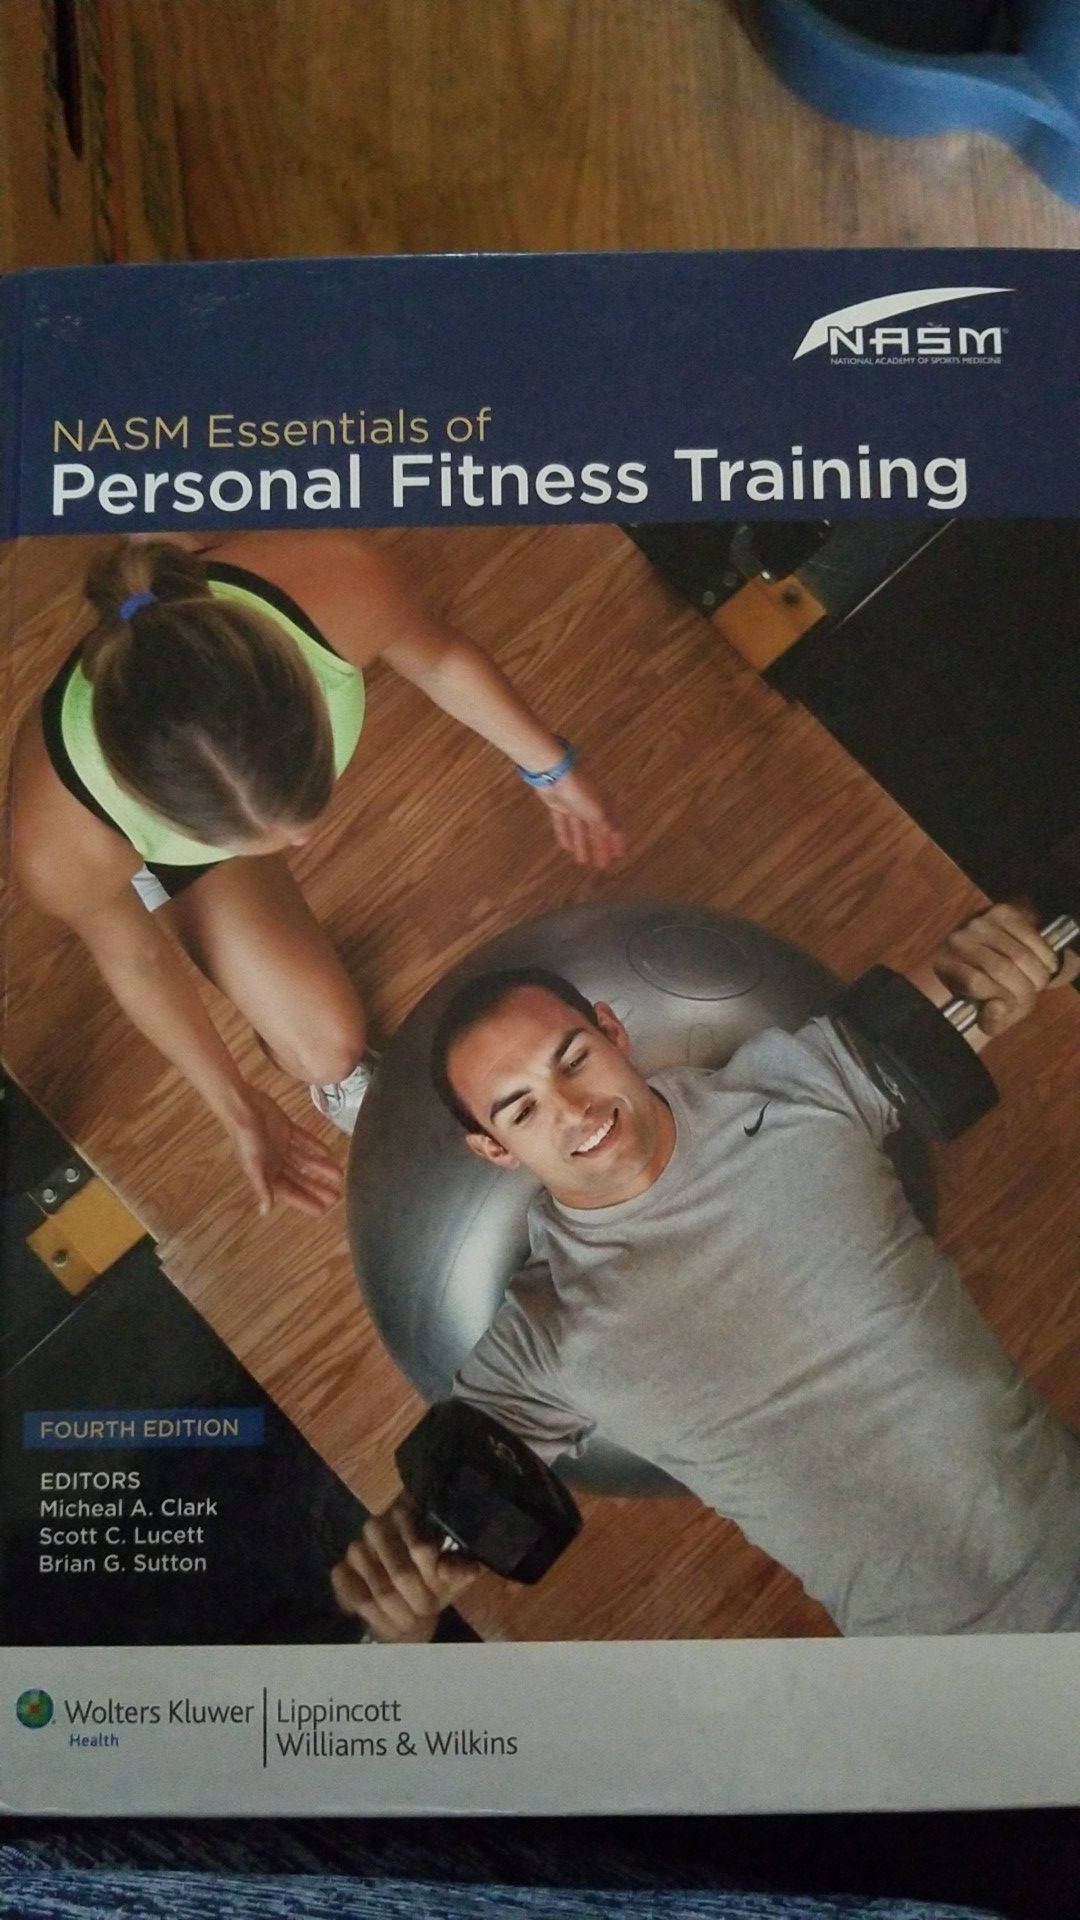 NASM Essentials of Personal Fitness Training 4th Edition